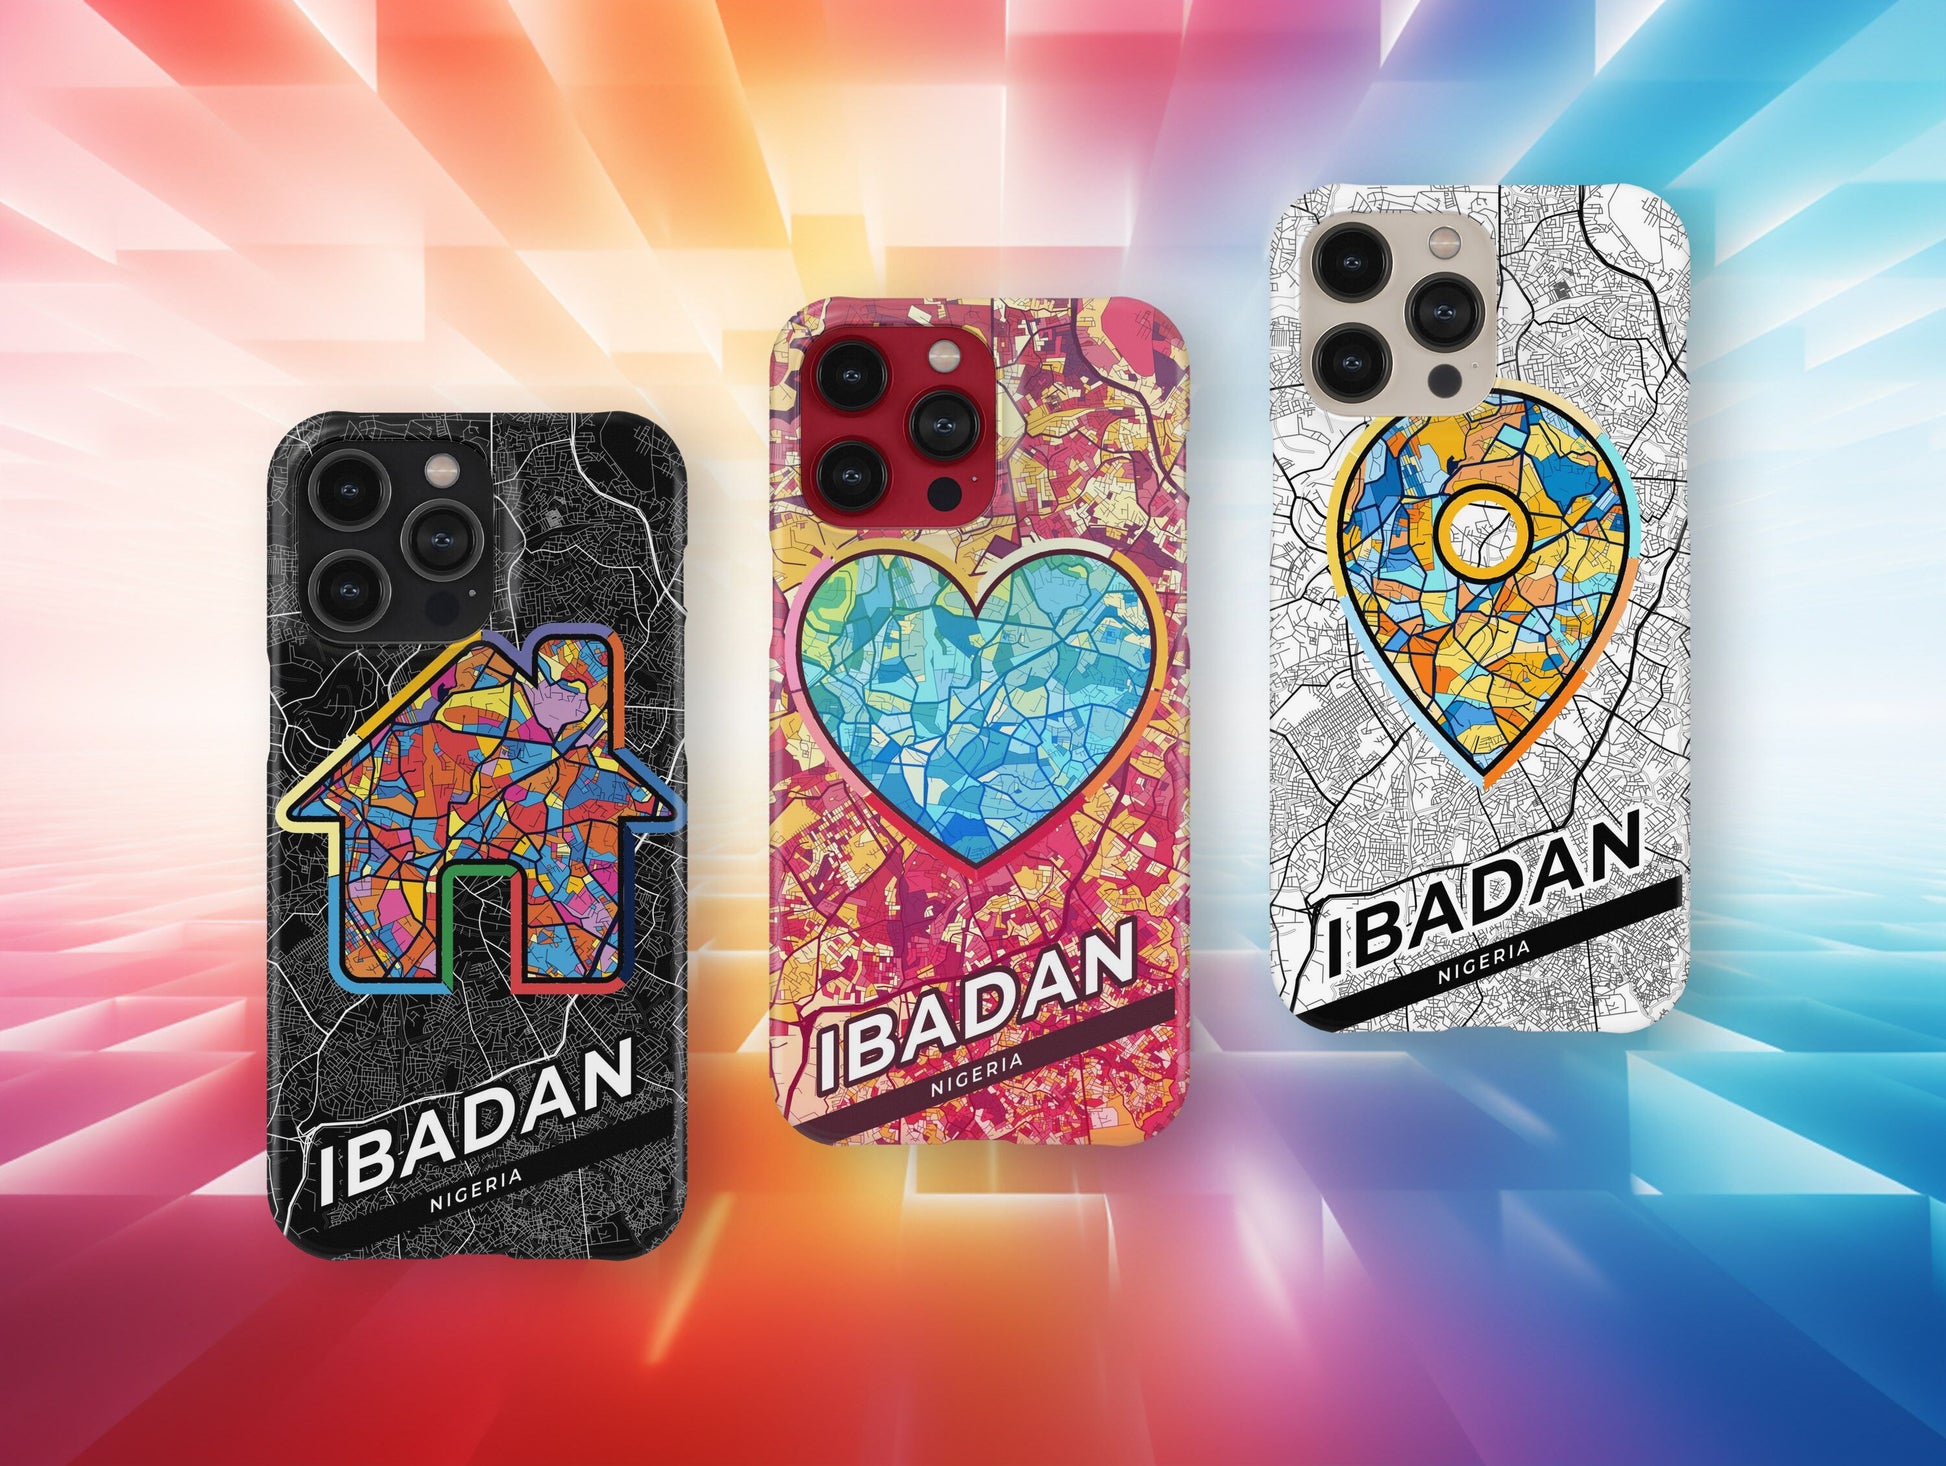 Ibadan Nigeria slim phone case with colorful icon. Birthday, wedding or housewarming gift. Couple match cases.